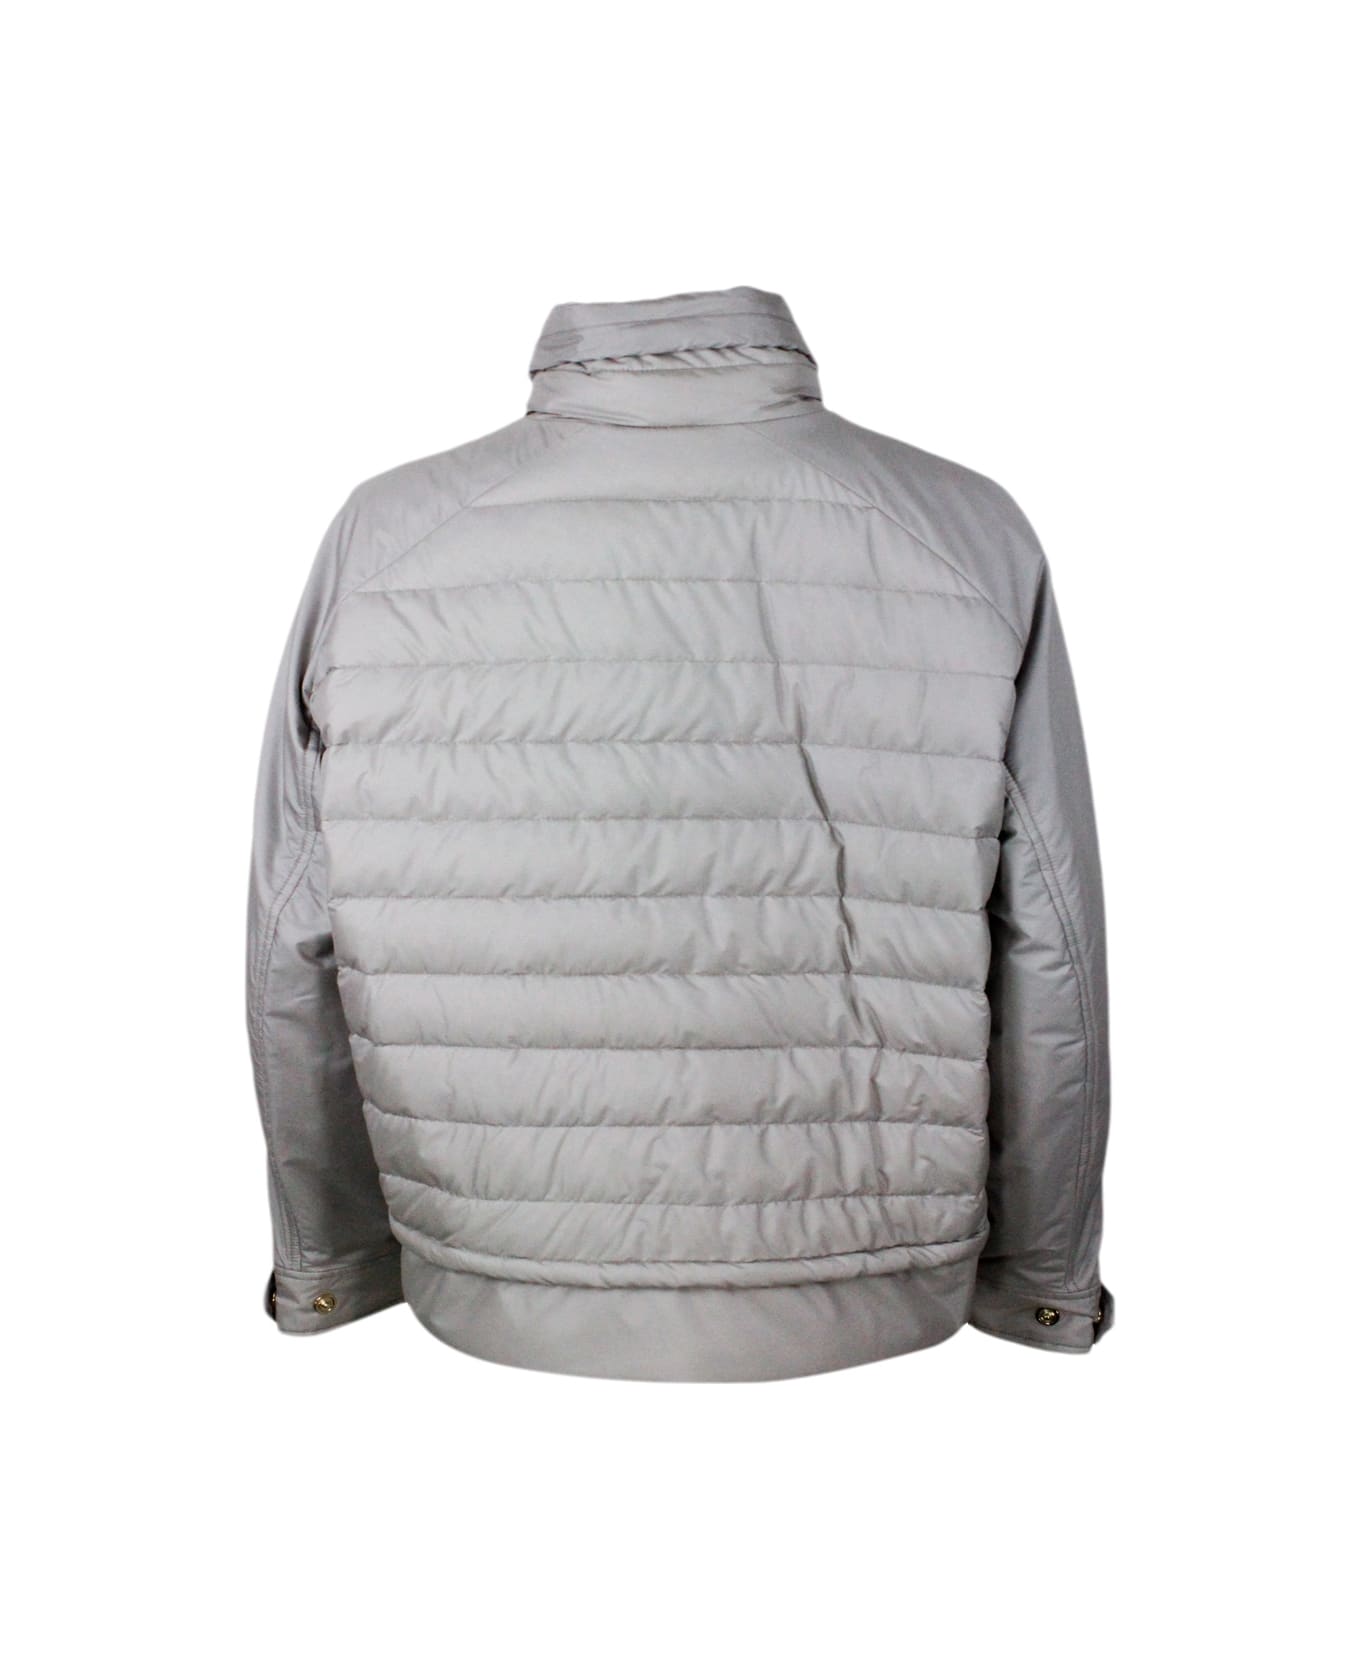 Moorer Lightweight 100 Gram Fine Down Jacket With An A-line Shape And Adjustable Drawstring At The Hem And Neck. Zip Closure - Ice